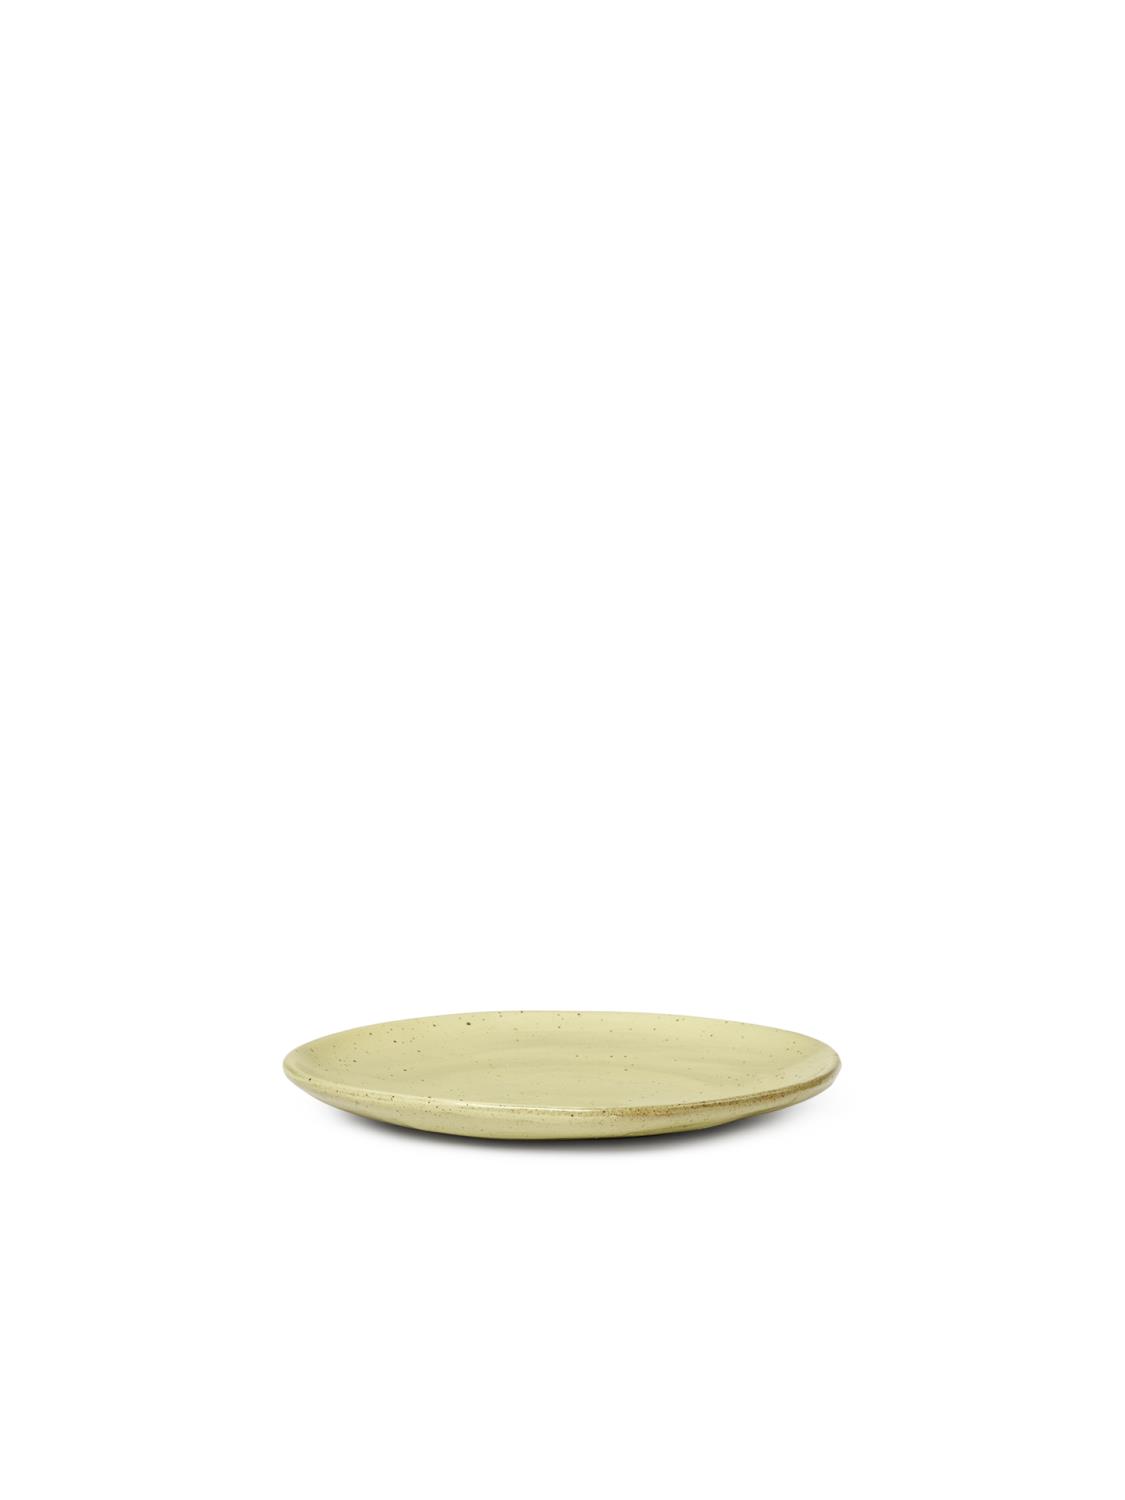 Ferm Living - Flow Plate - Yellow Speckle - Small